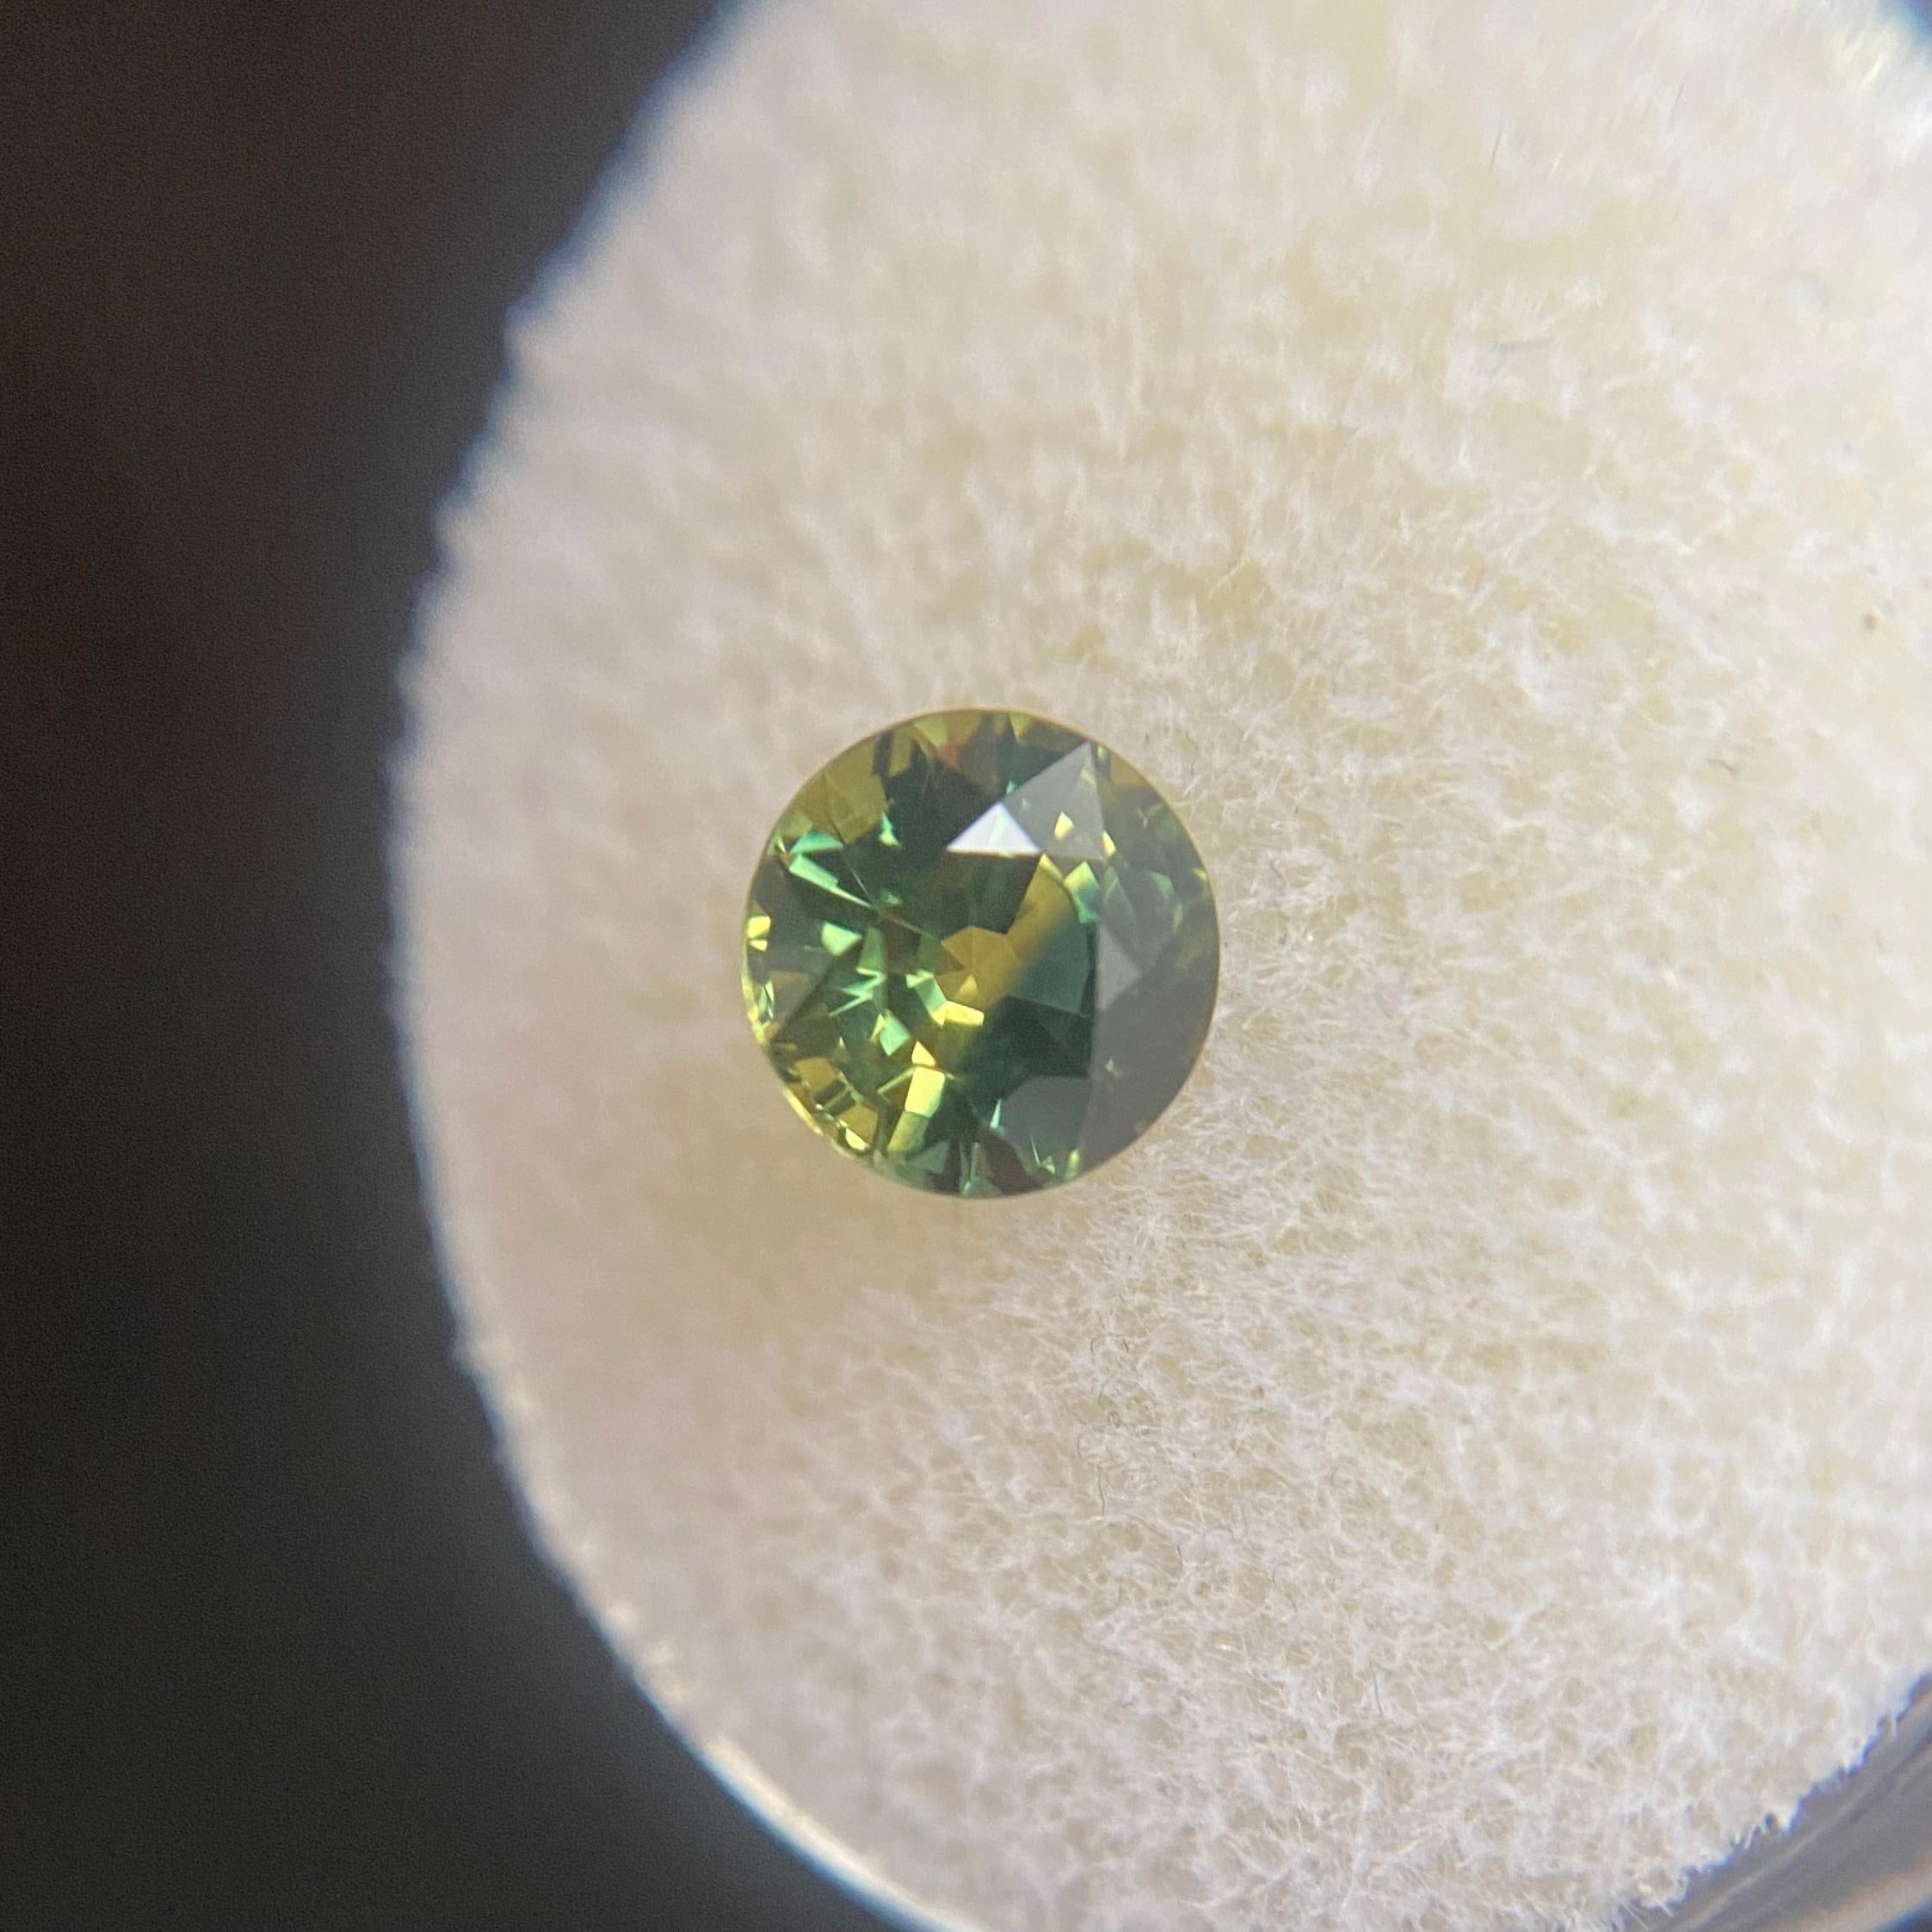 Yellow Green Bi-Colour Australian Sapphire Gemstone.

1.32 Carat with a beautiful and unique yellow green parti-colour and very good clarity, a clean stone. Also has an excellent round cut and ideal polish to show great shine and colour, would look